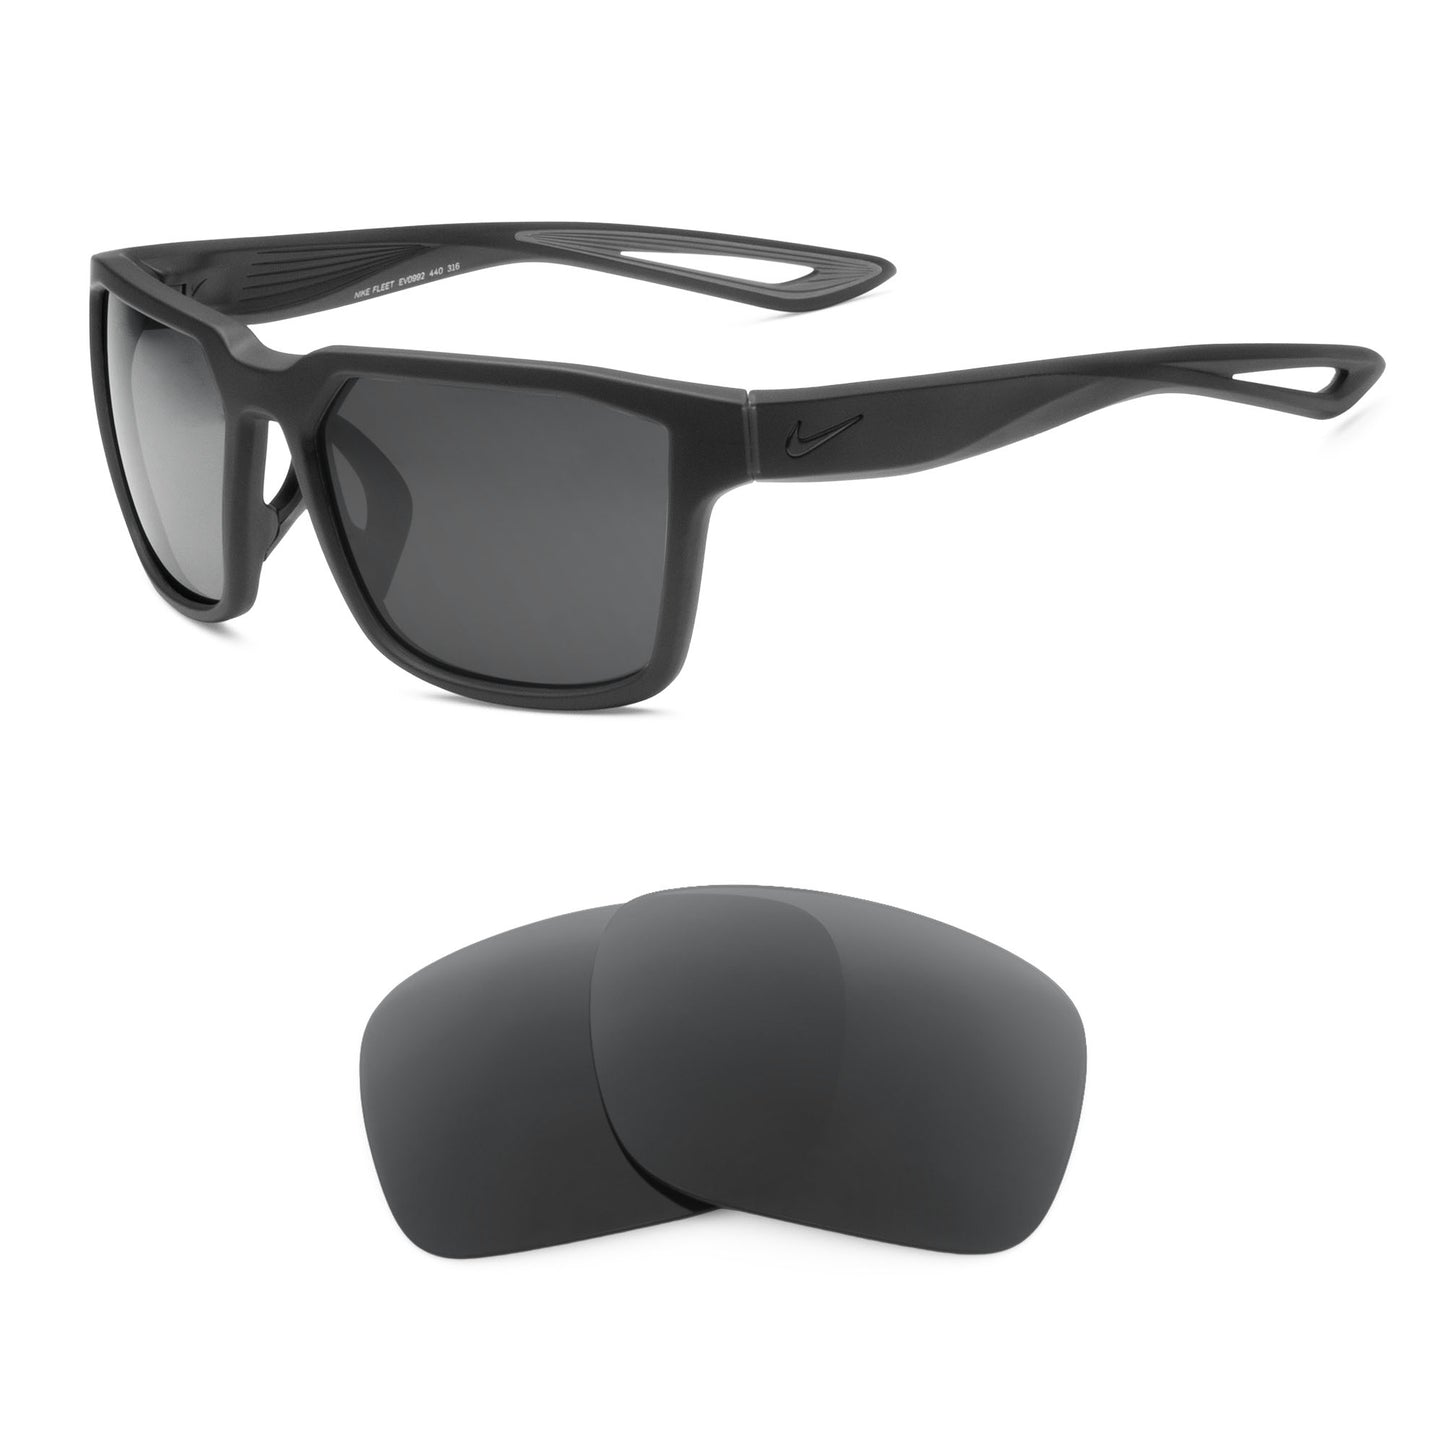 Nike Fleet sunglasses with replacement lenses